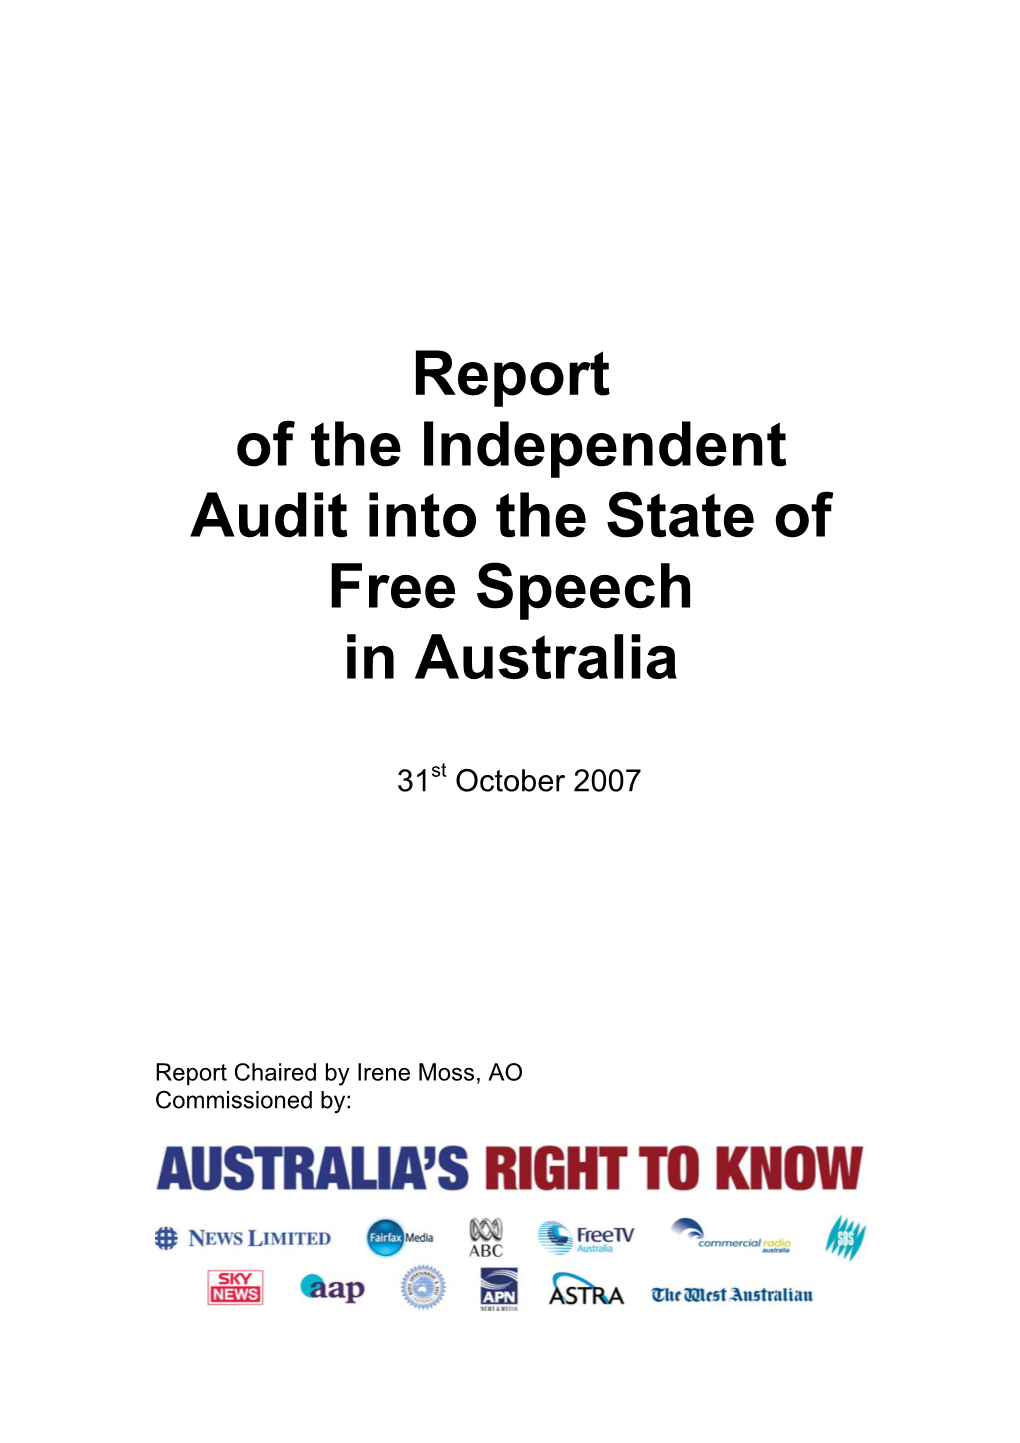 Report of the Independent Audit Into the State of Free Speech in Australia